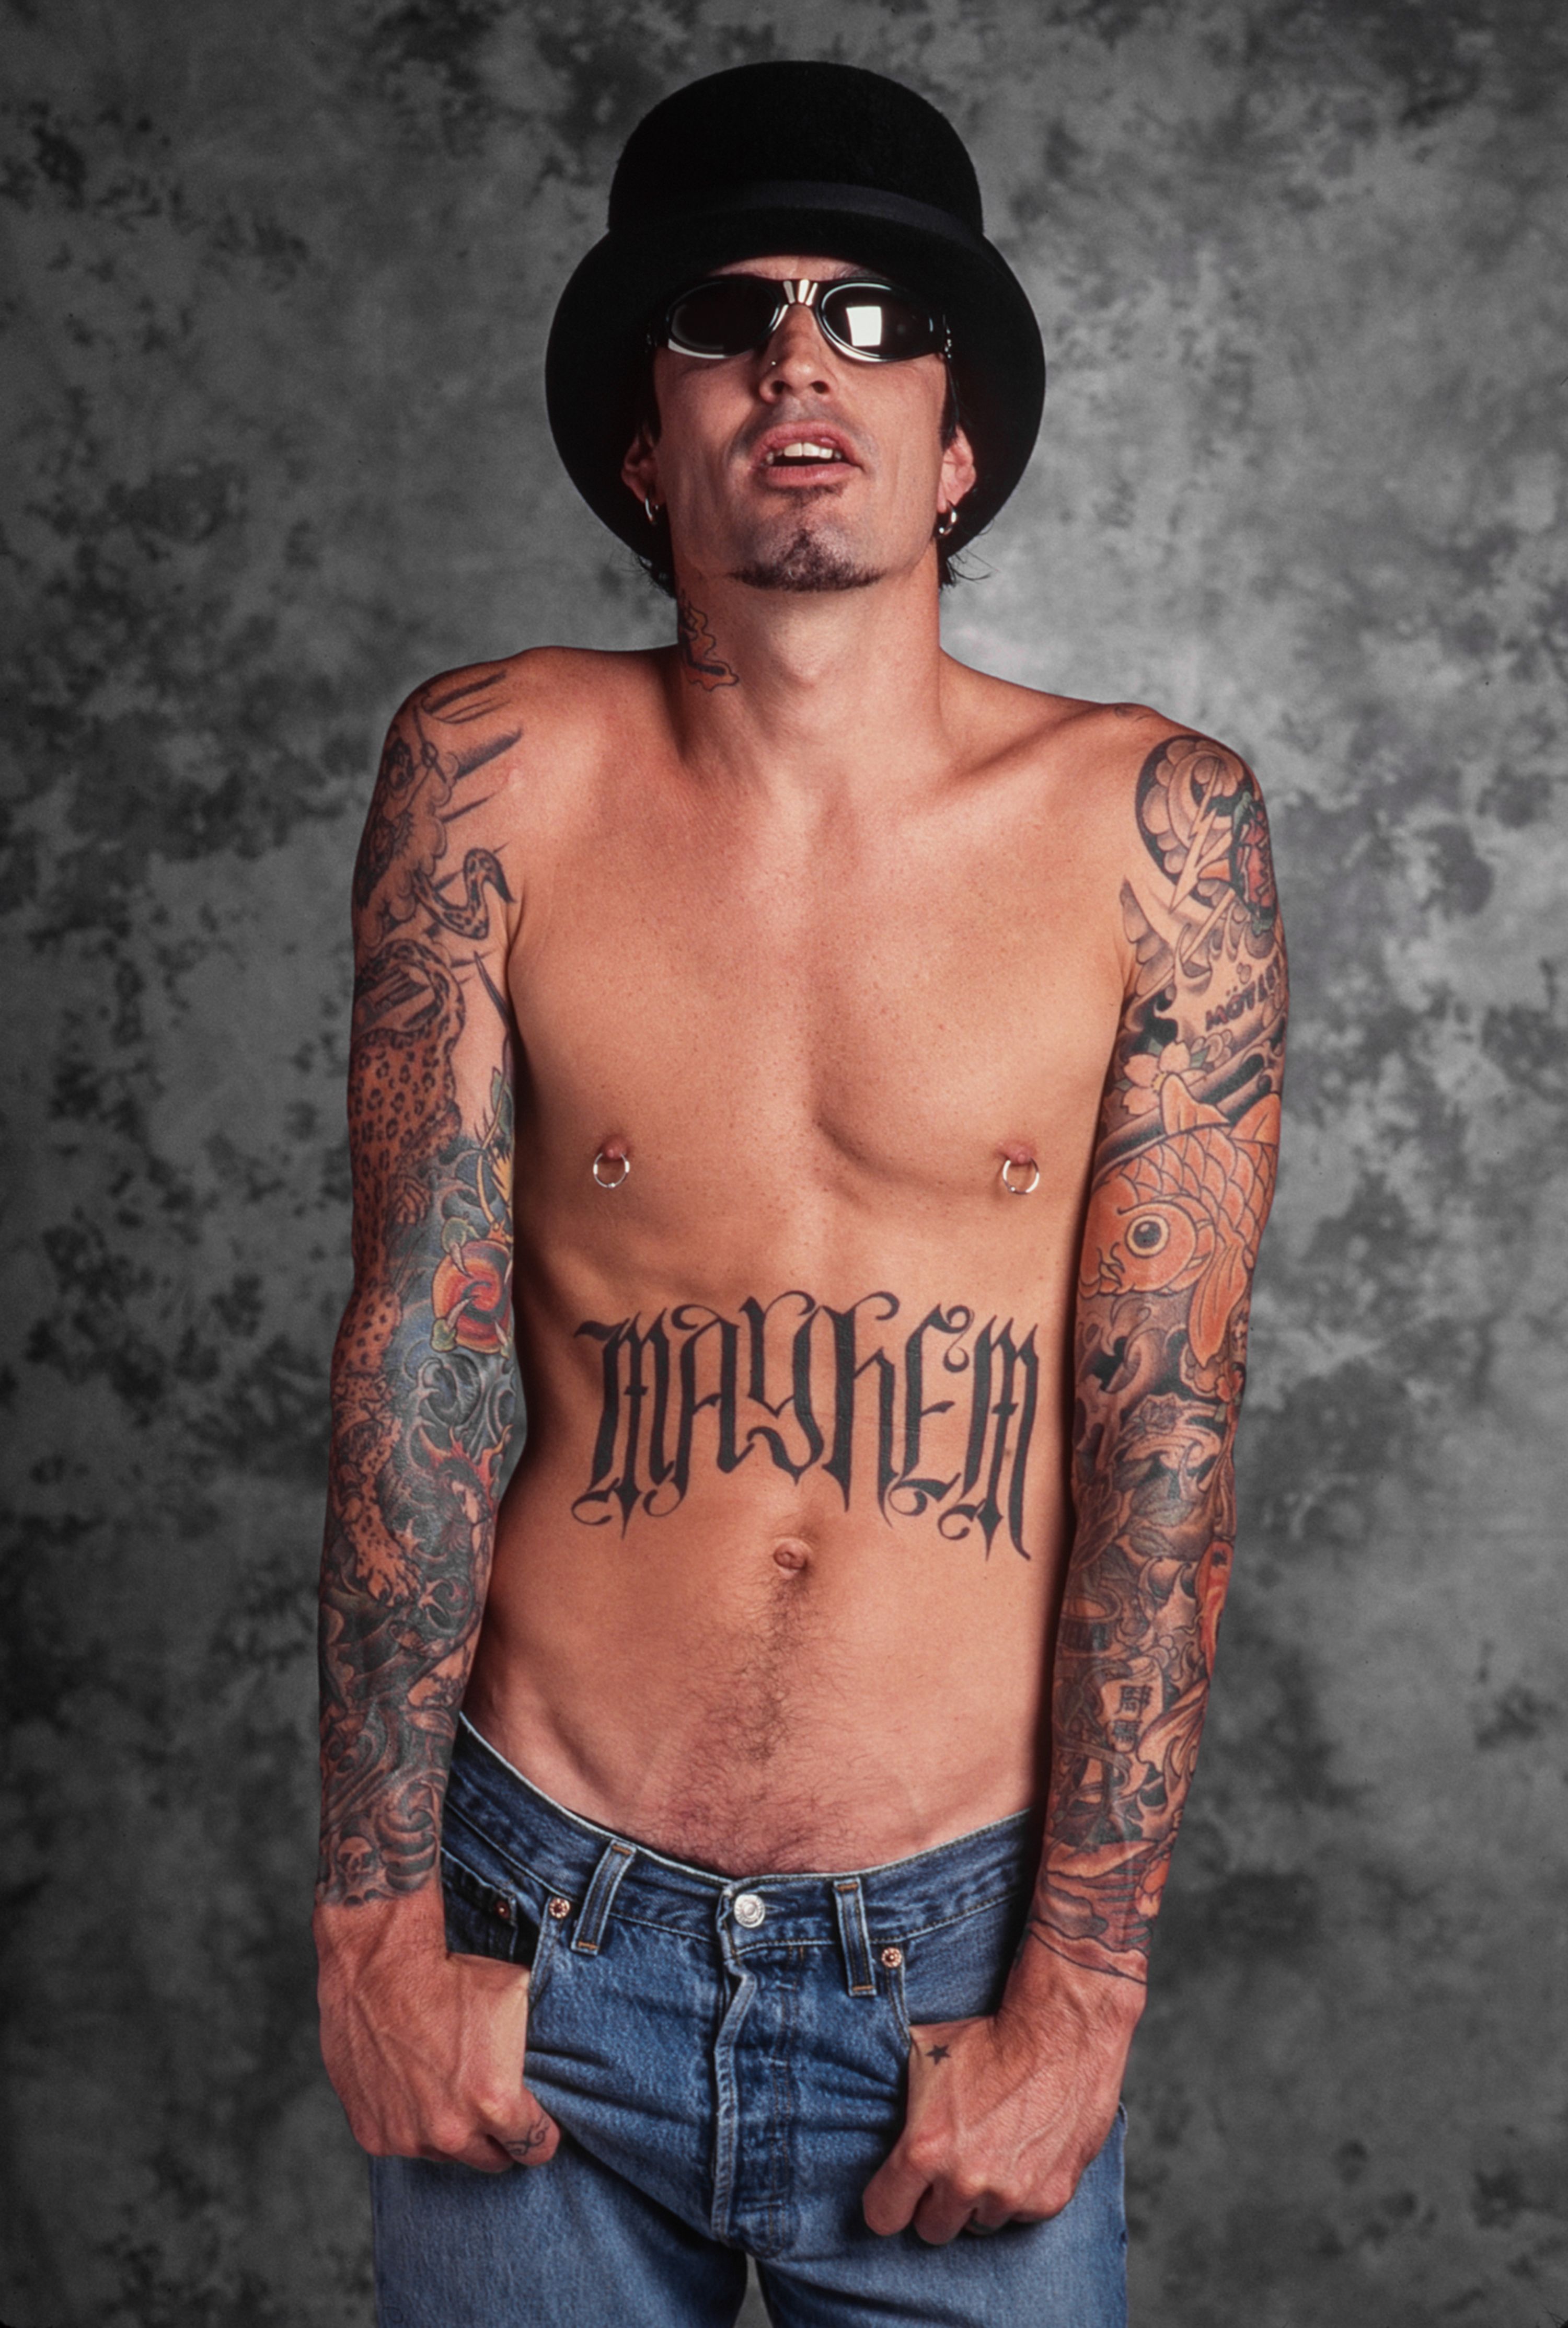 Where Is Tommy Lee Now? His Life After Pamela Anderson, Spouse